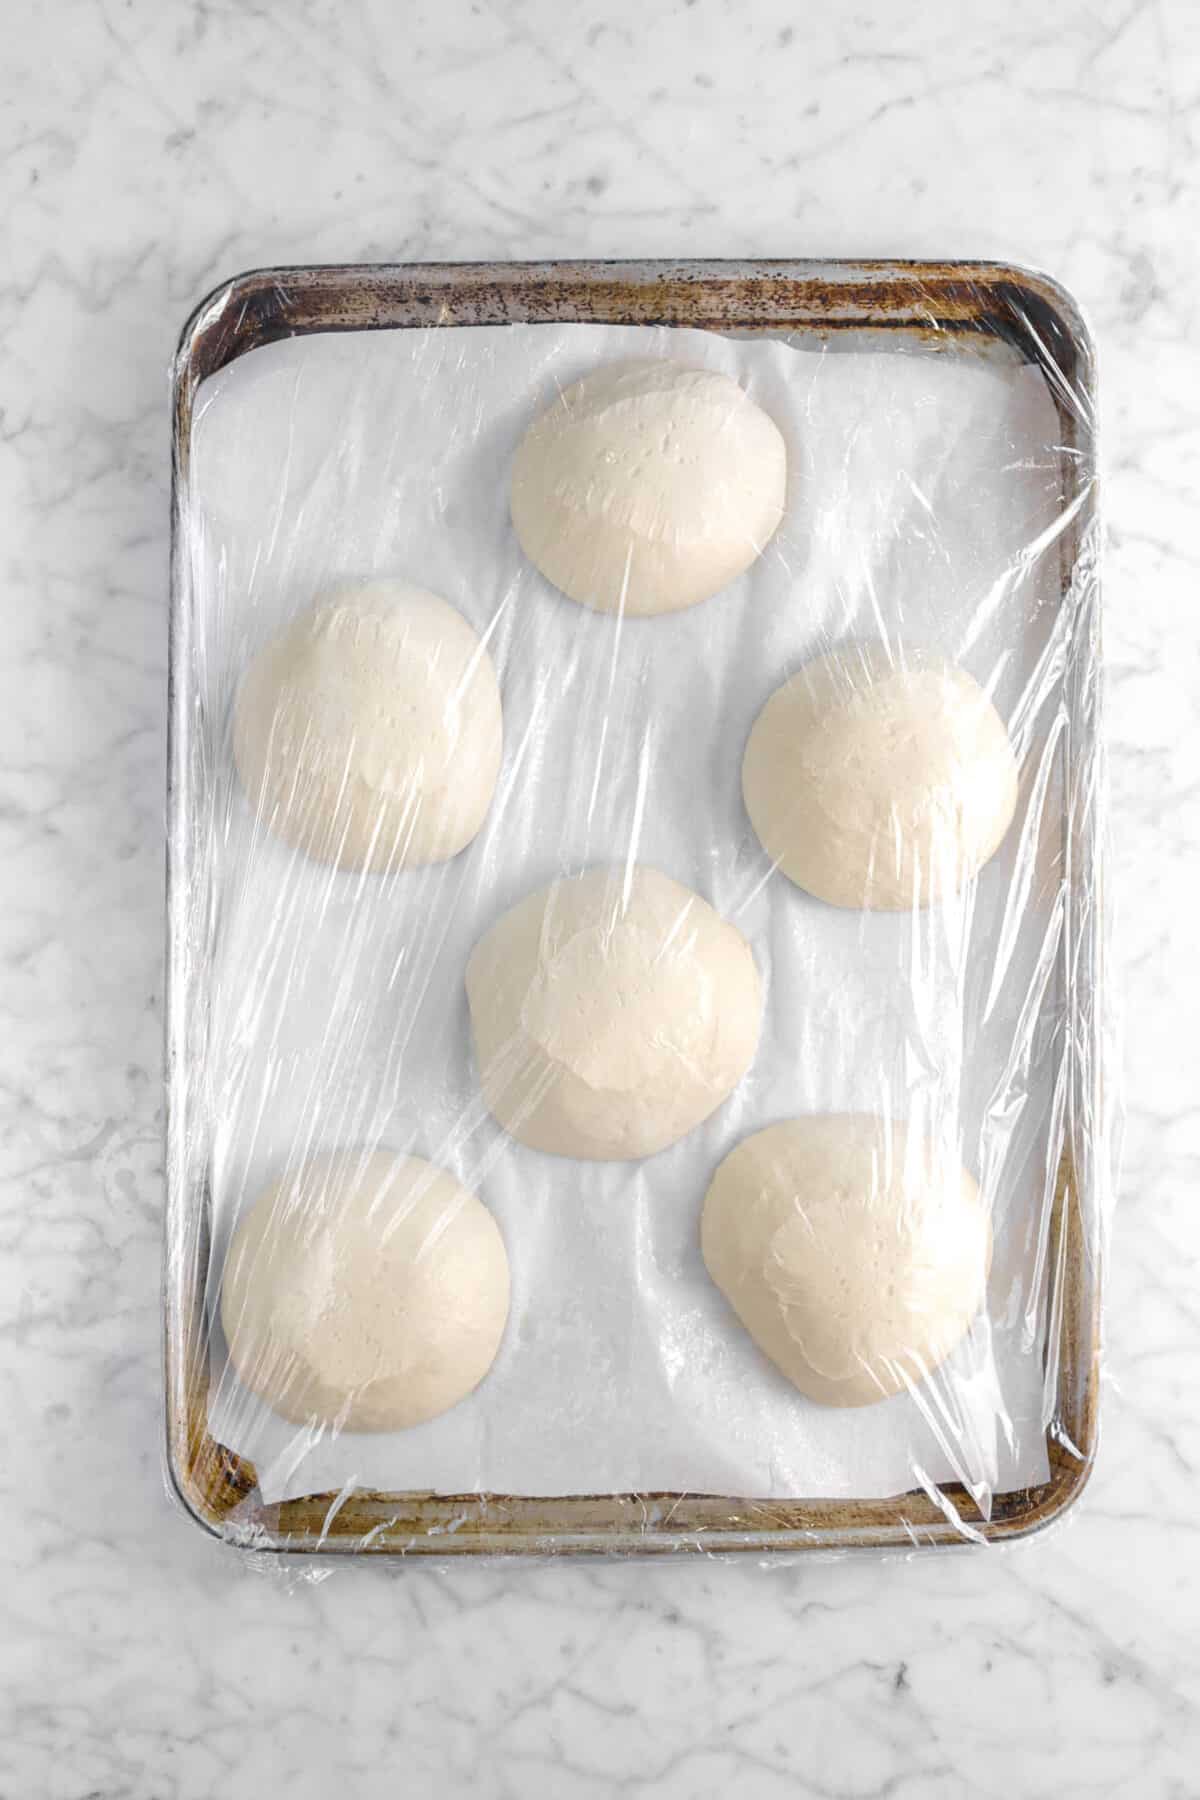 six dough boules after rising on lined baking sheet and covered with plastic wrap